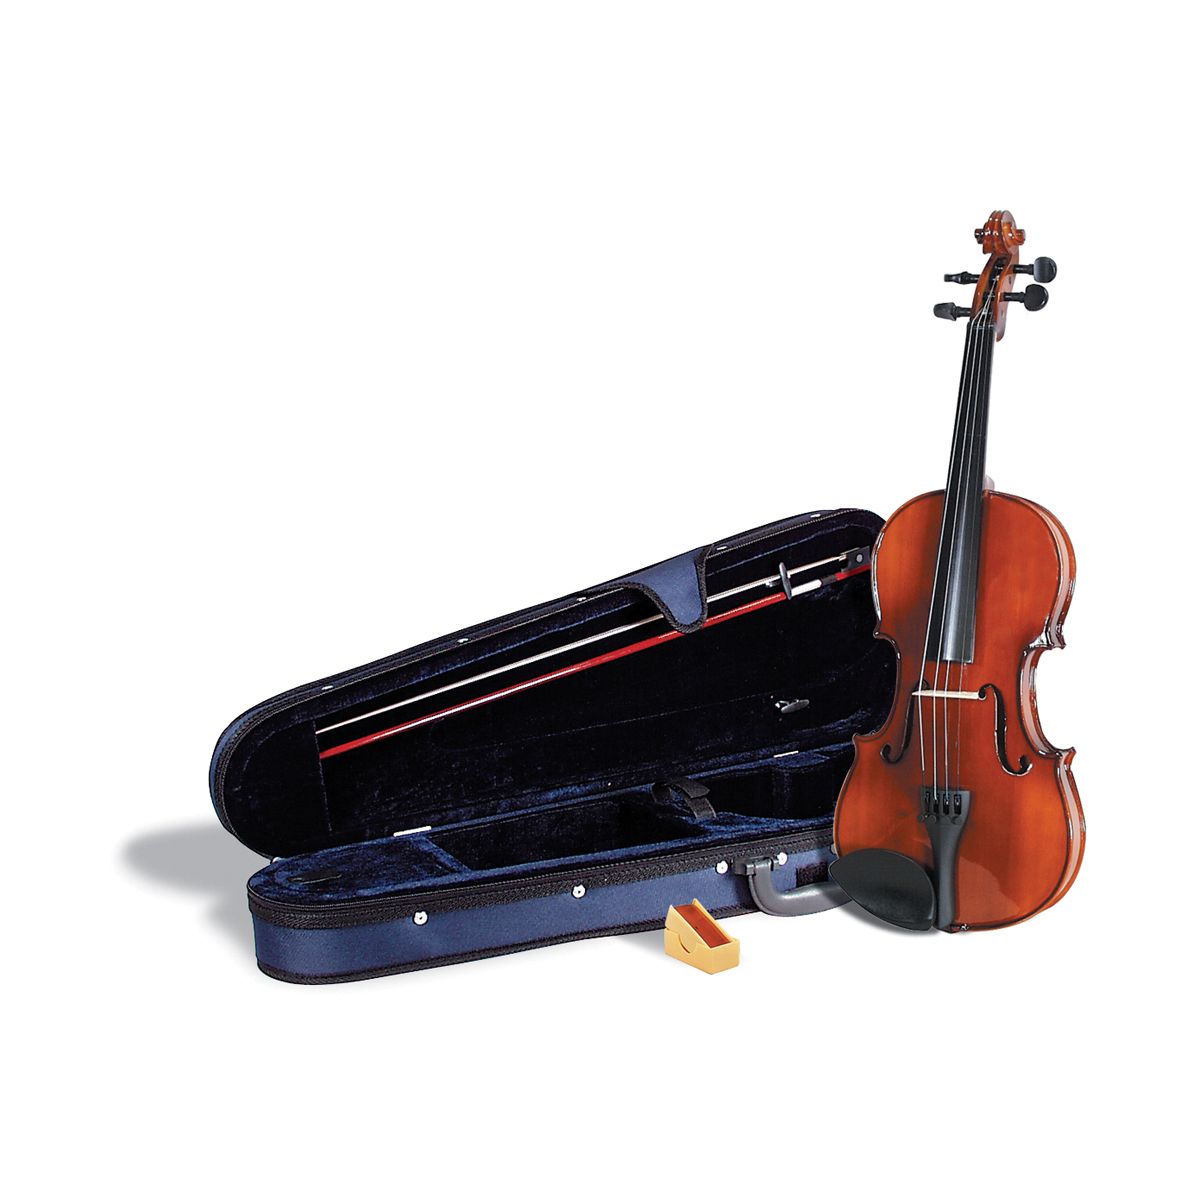 Maestro Half-Size (1/2) Violin with Case and Bow